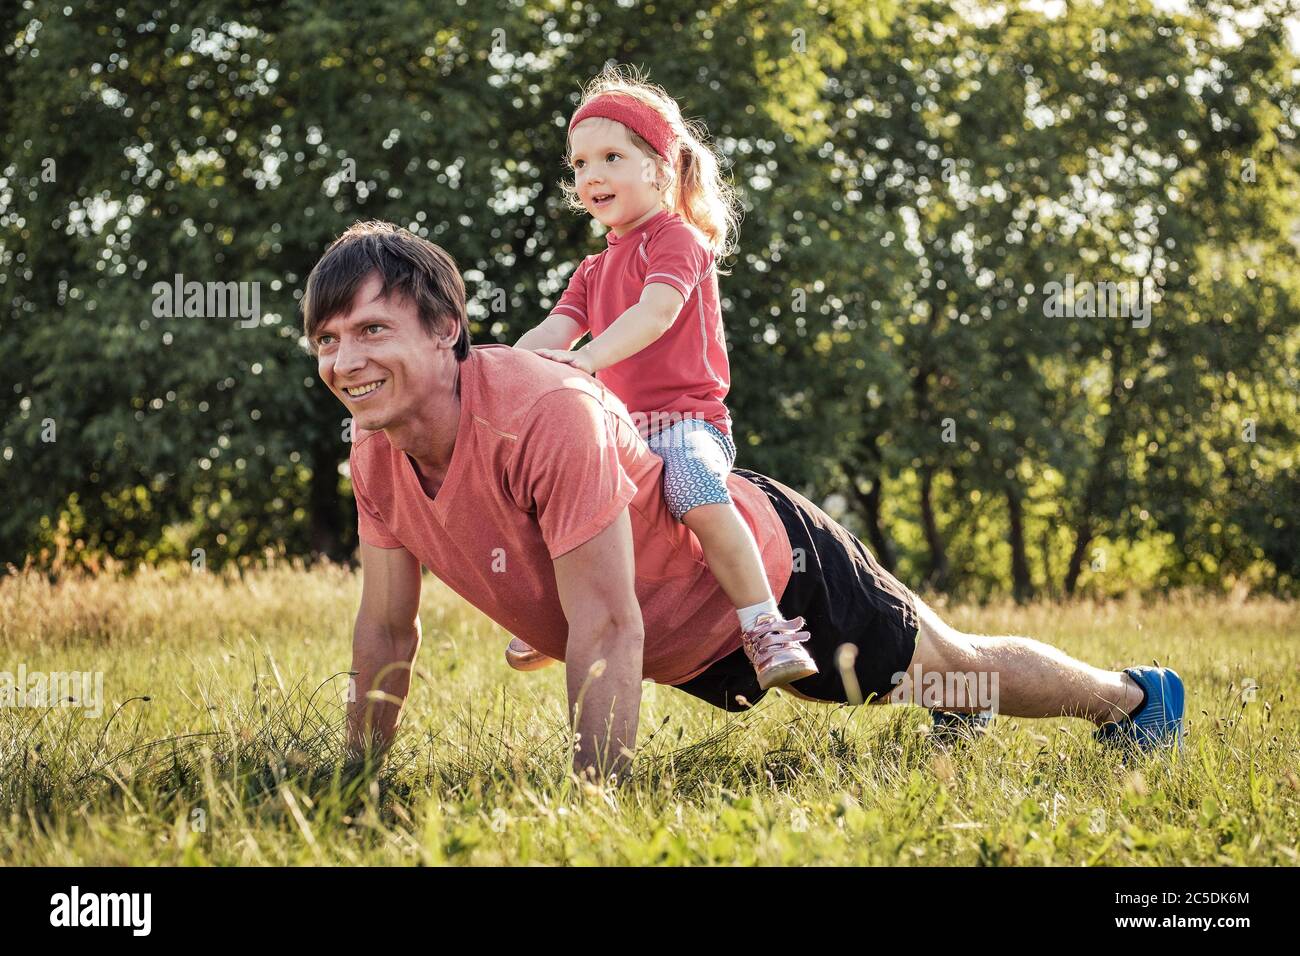 Father playing with his cute young daughter outdoors as he does press-ups on the grass with her riding on his back laughing in an active healthy lifes Stock Photo